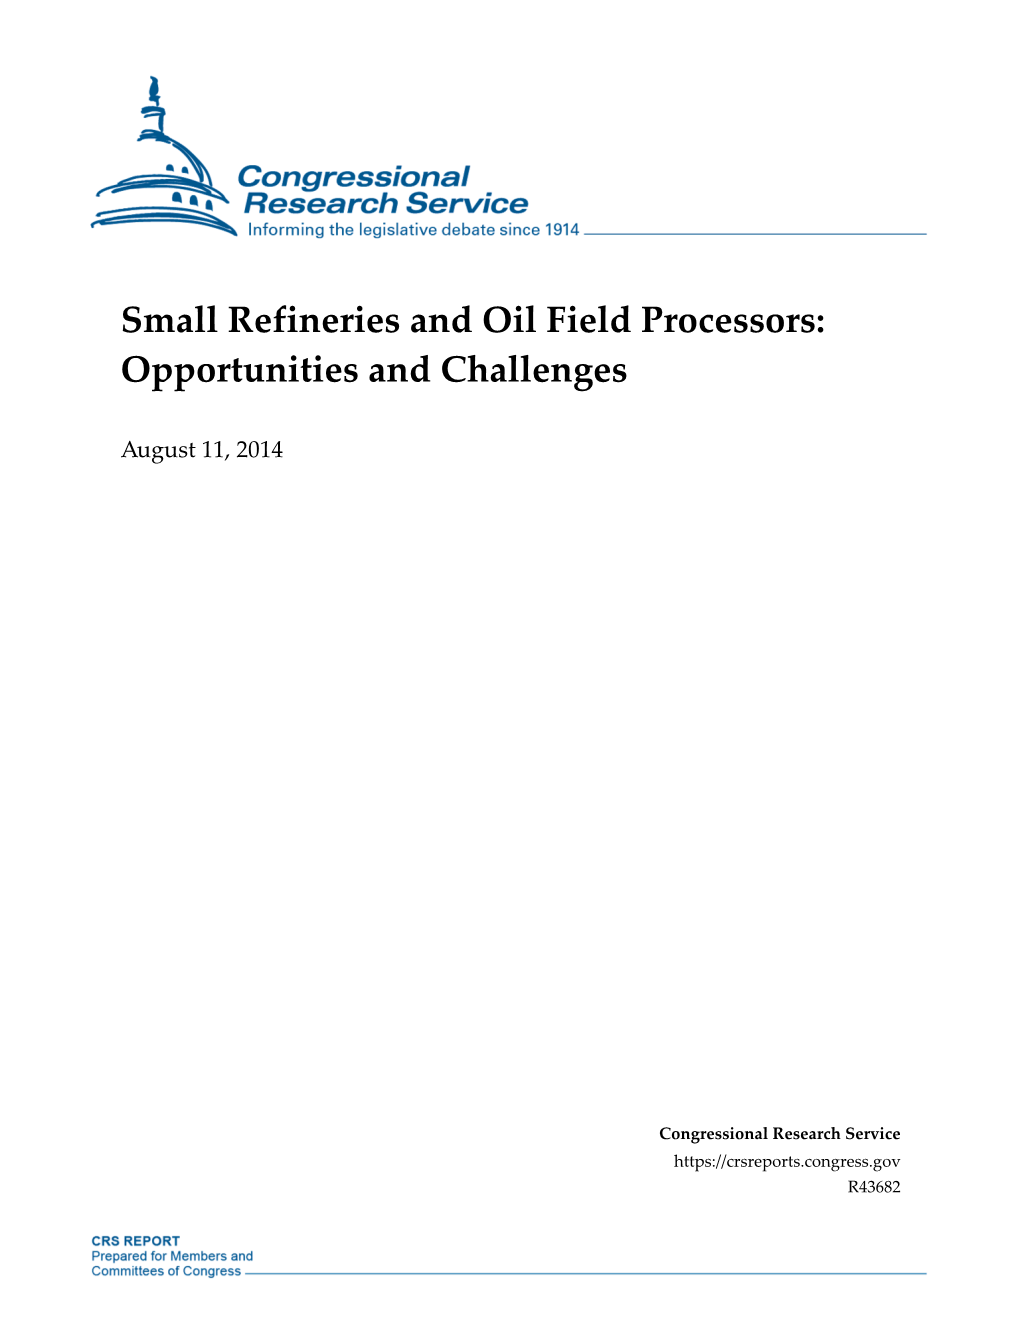 Small Refineries and Oil Field Processors: Opportunities and Challenges